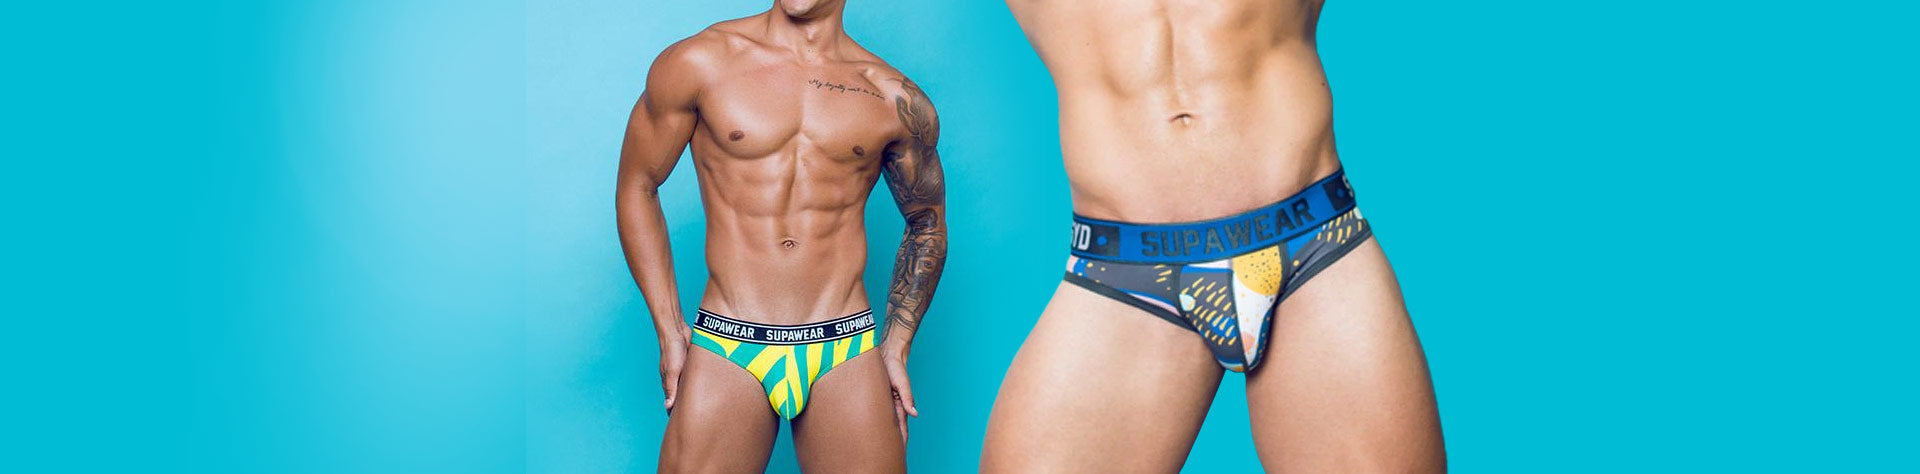 Alpha Male Undies is the perfect place to purchase stylish, athletic or enhancing briefs tailored to your taste.